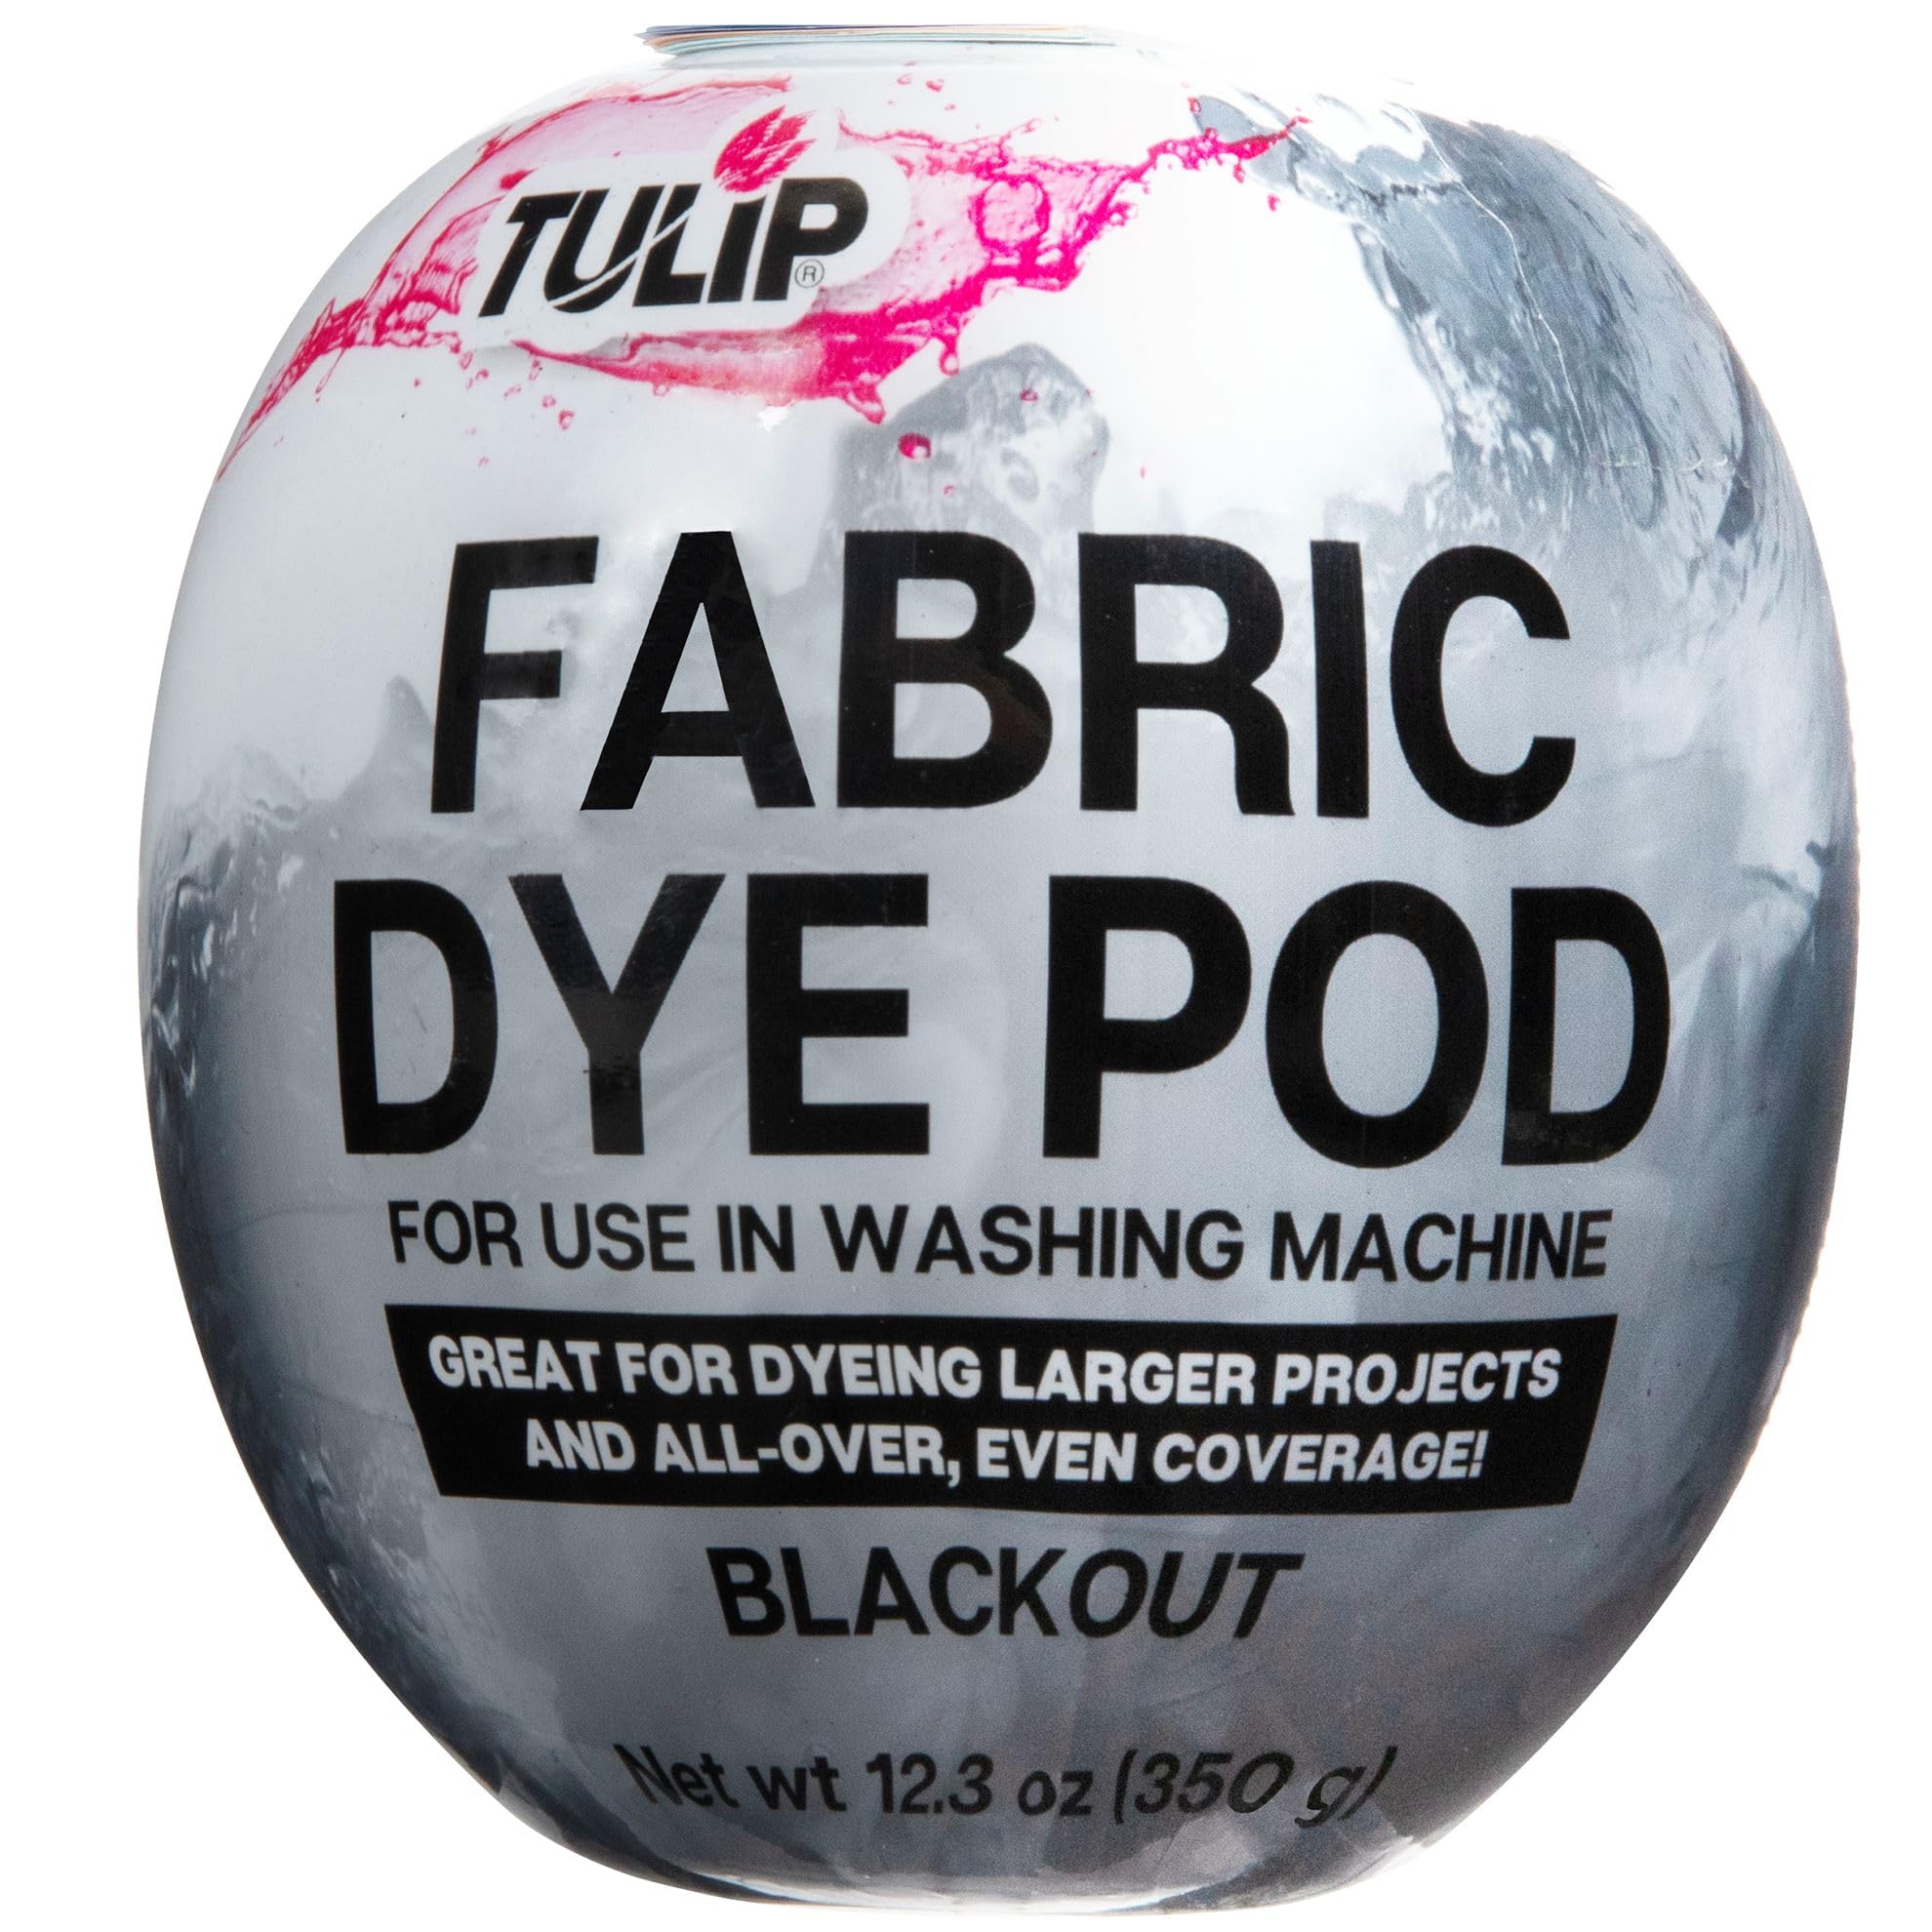 Tulip Fabric Dye Pod Blackout (Black), Permanent Dye for Clothes and Fabric